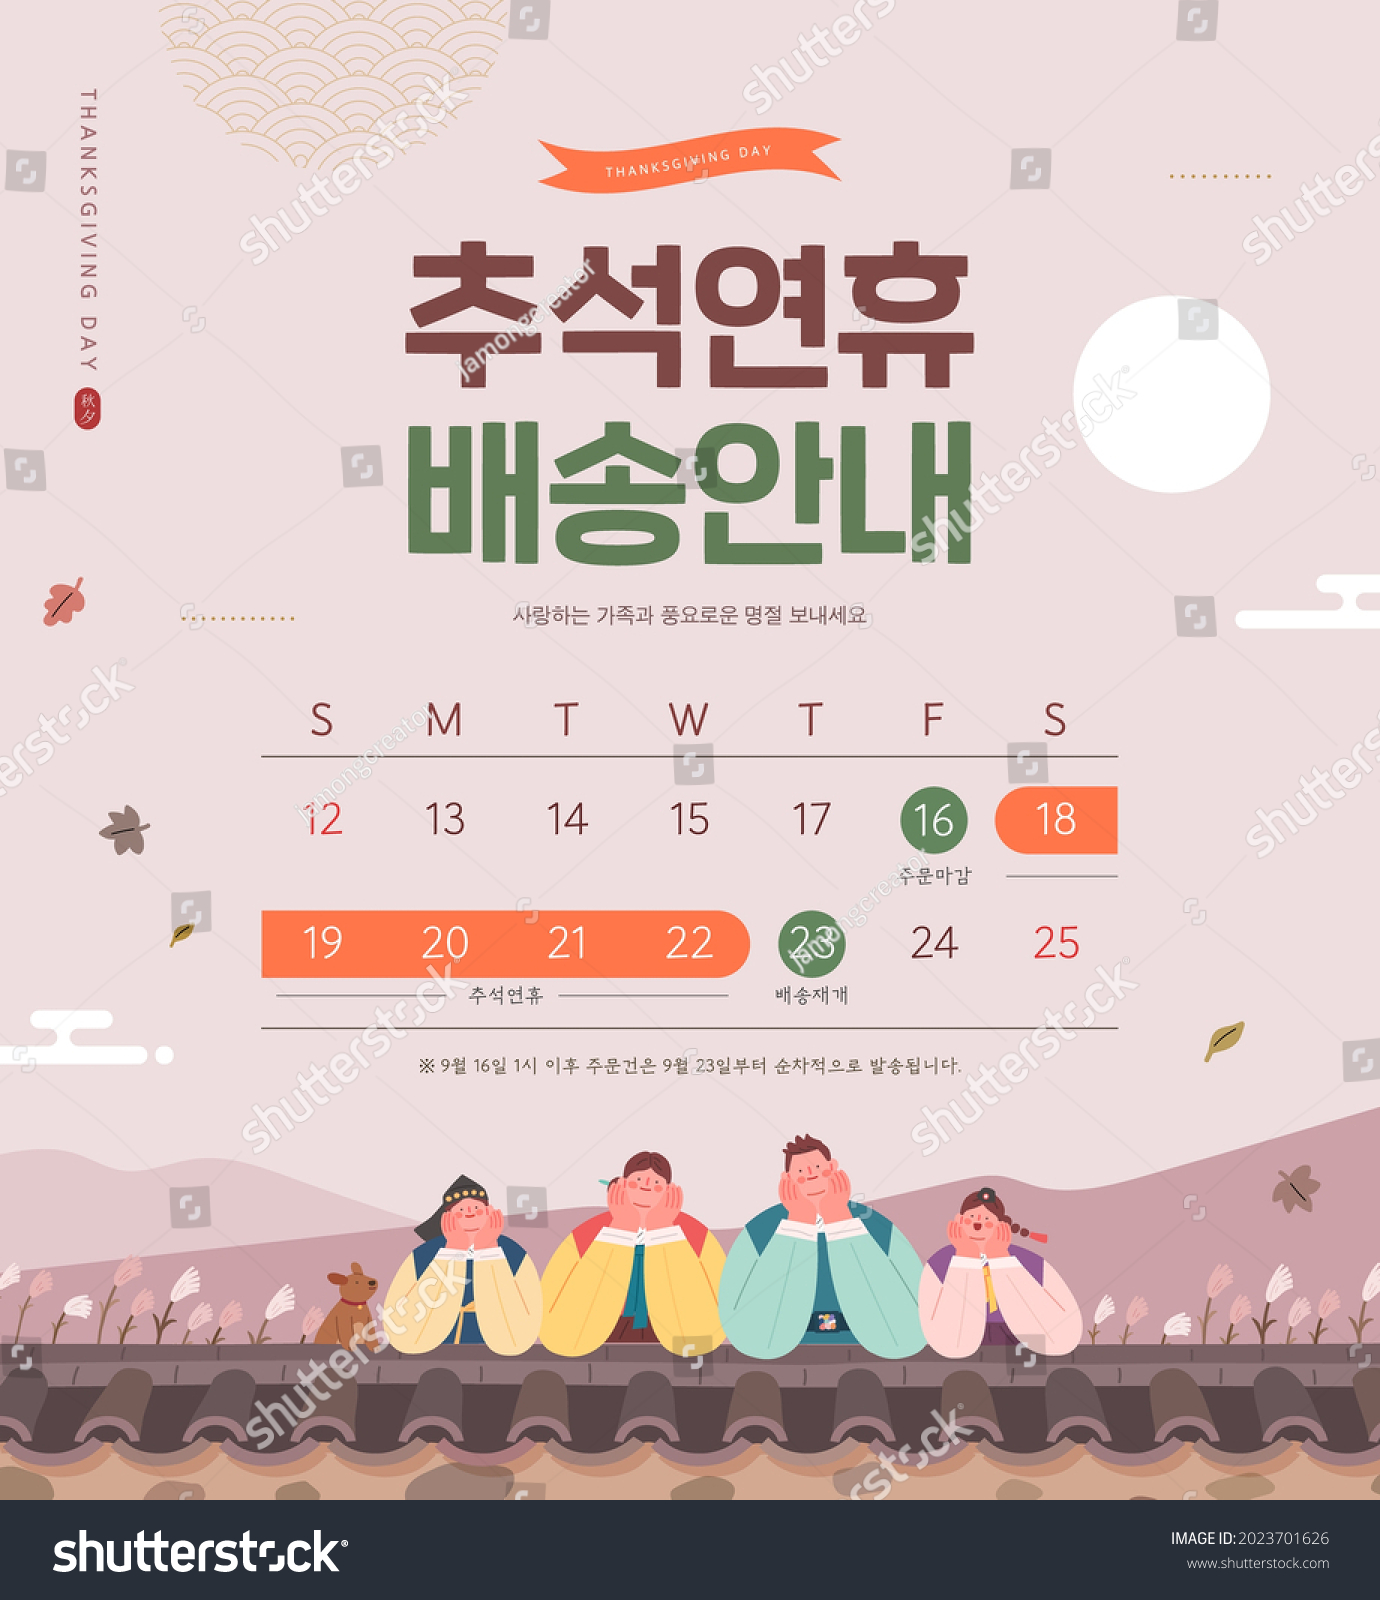 Korean Thanksgiving Day shopping event pop-up Illustration. Korean Translation: "Thanksgiving Day Shipping information"  #2023701626